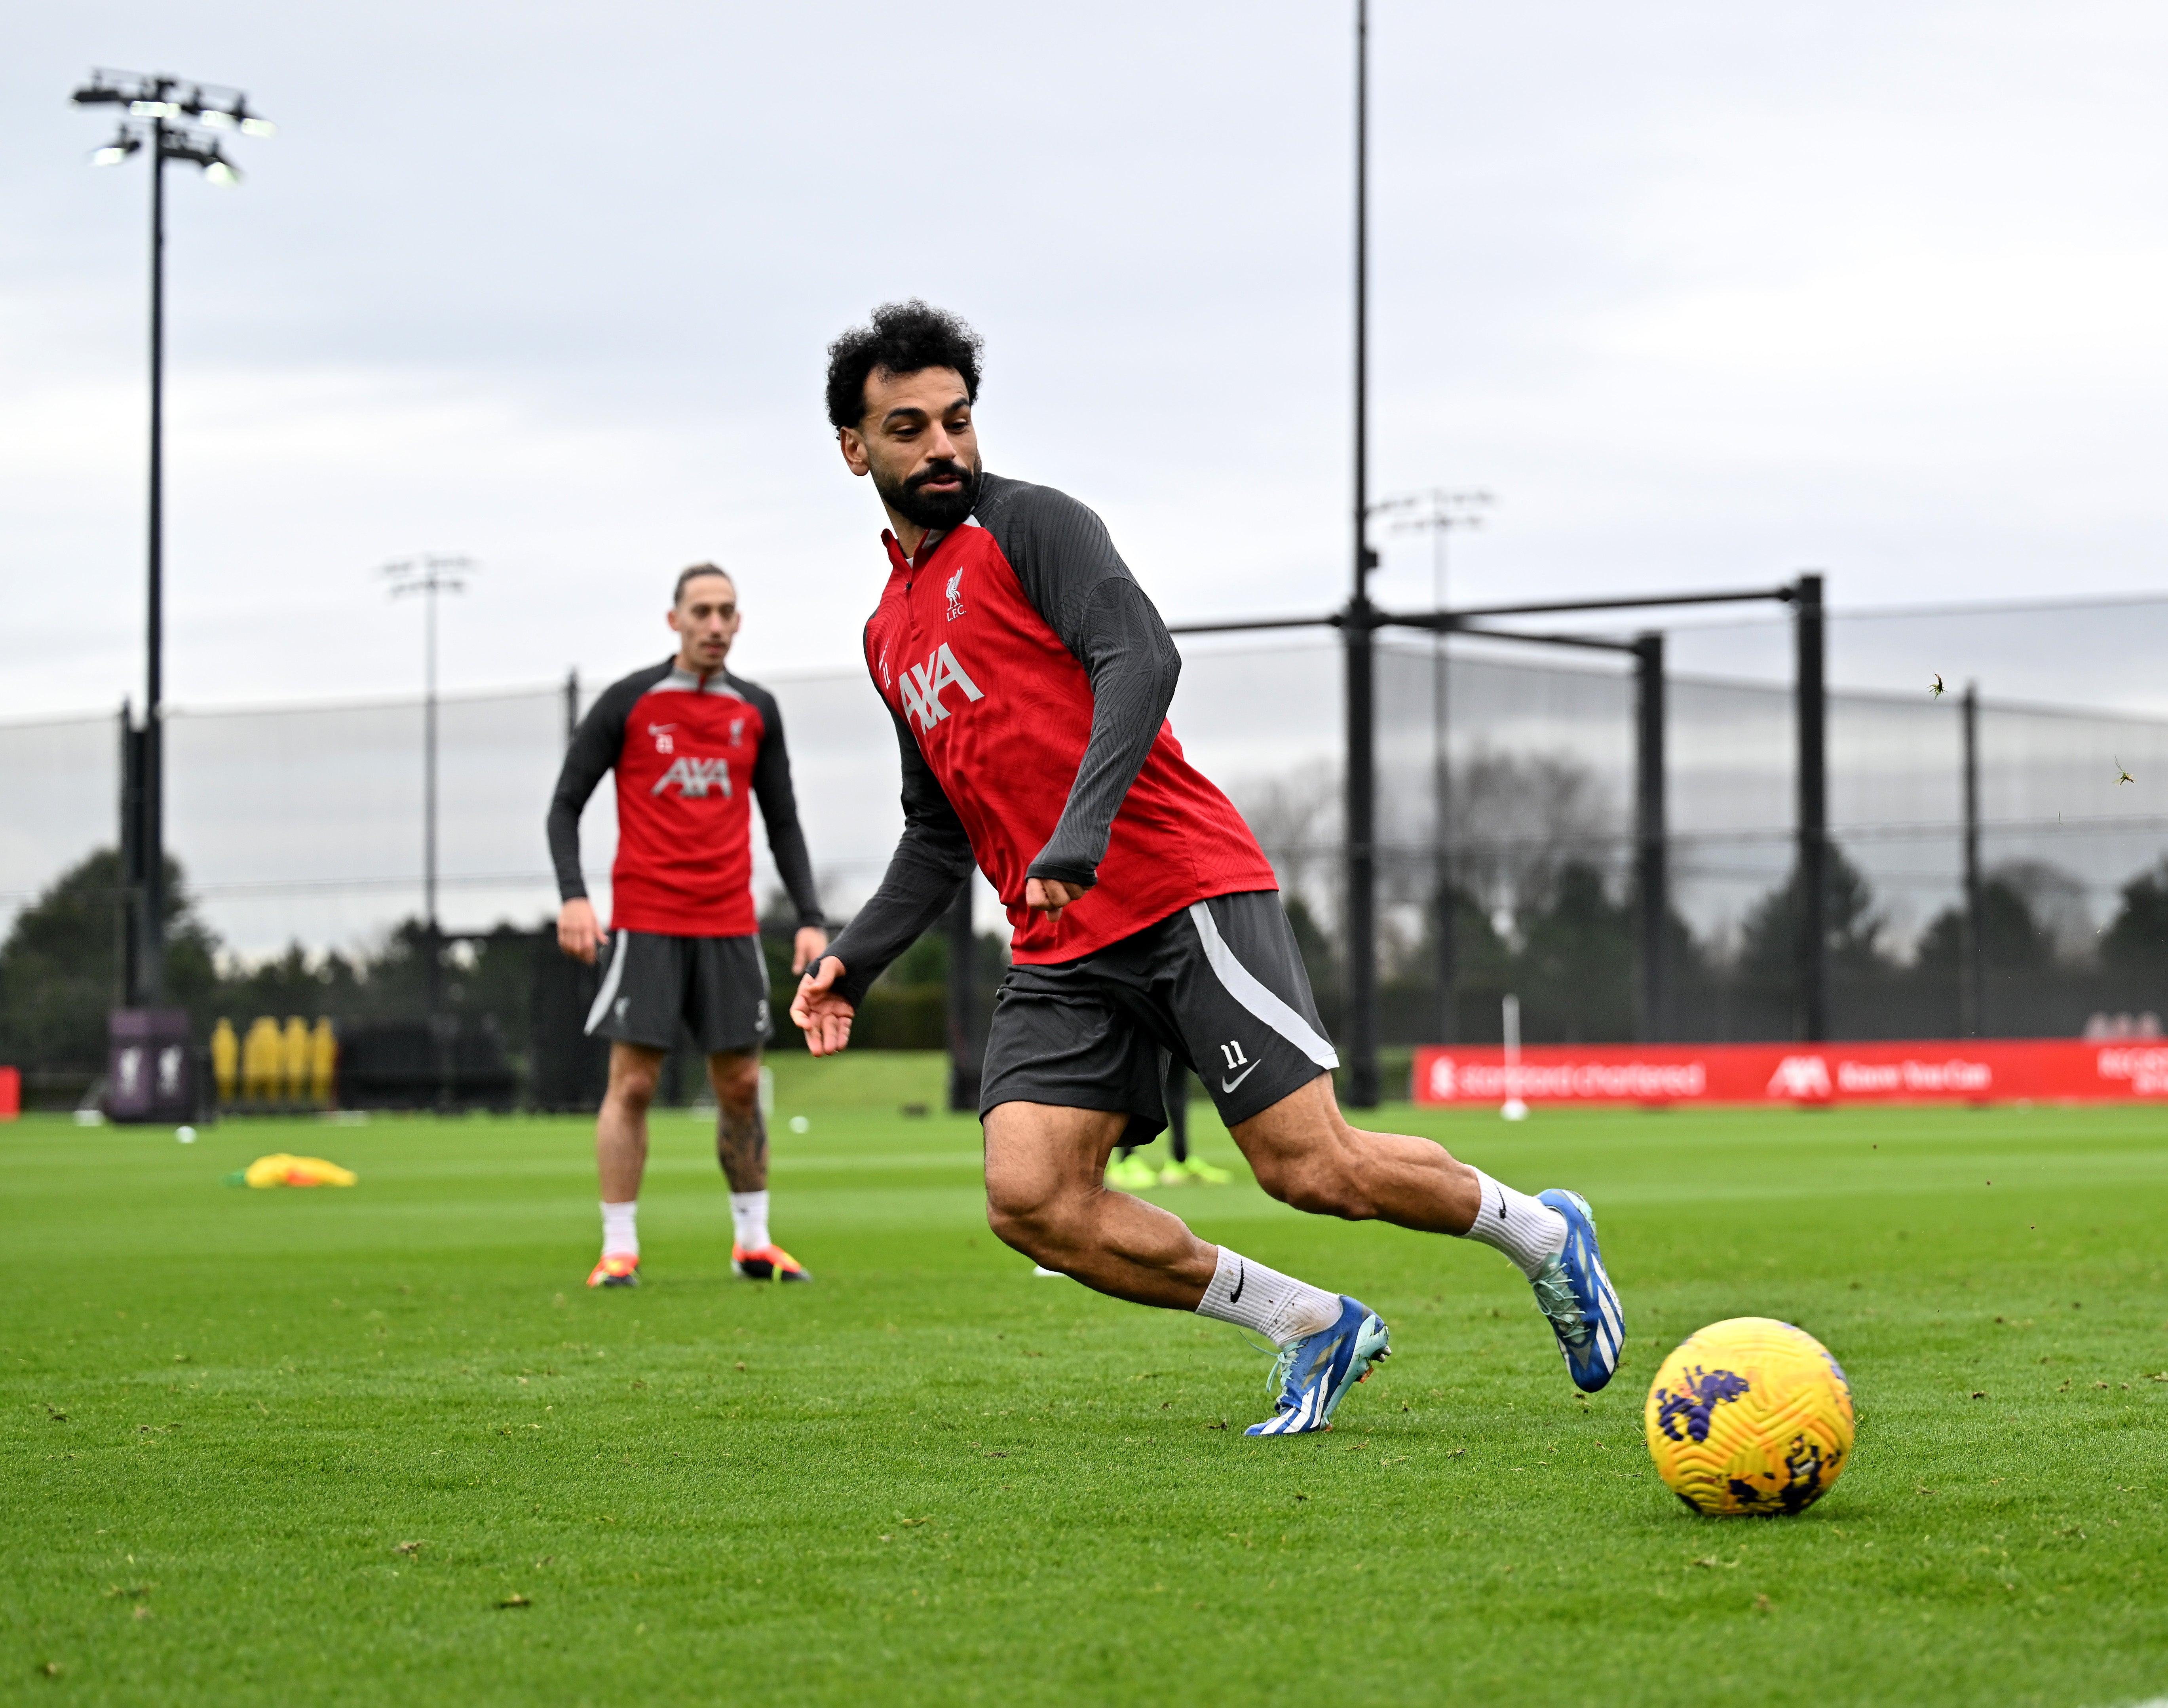 Mohamed Salah of Liverpool returned to training this week